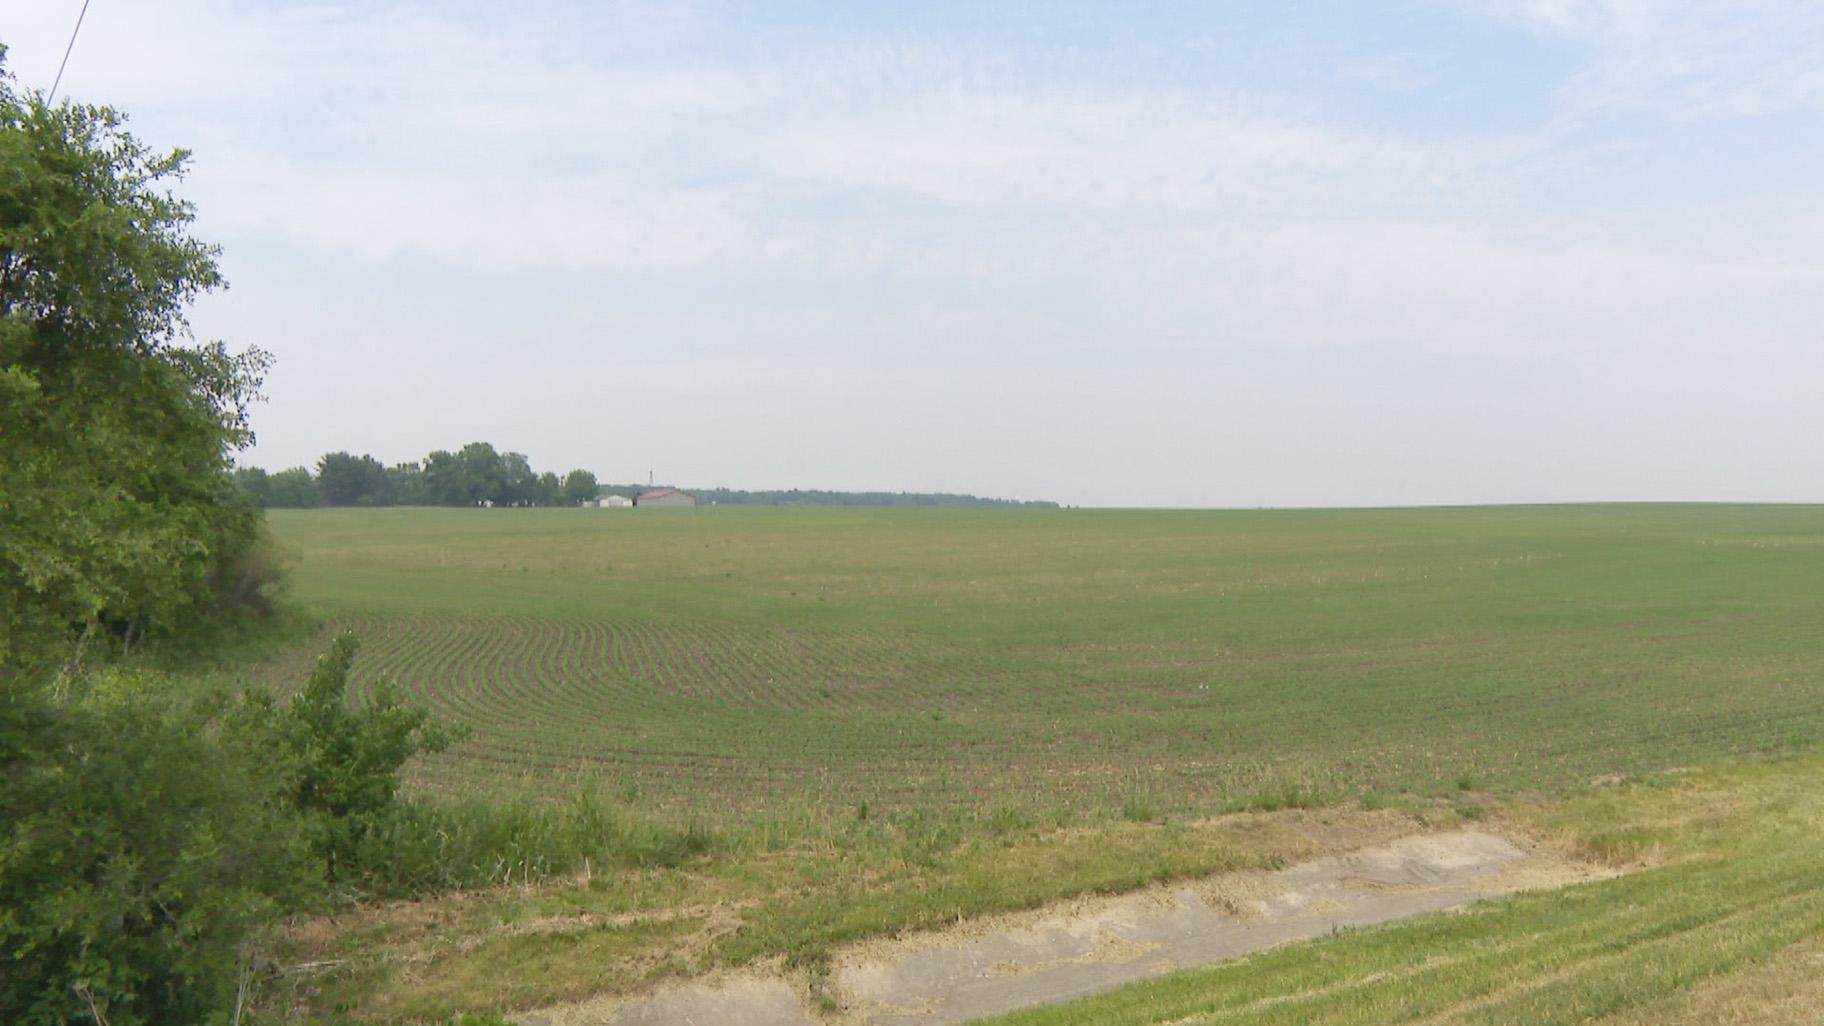 Hundreds of acres of land in Sugar Grove are targeted for redevelopment. (WTTW News)